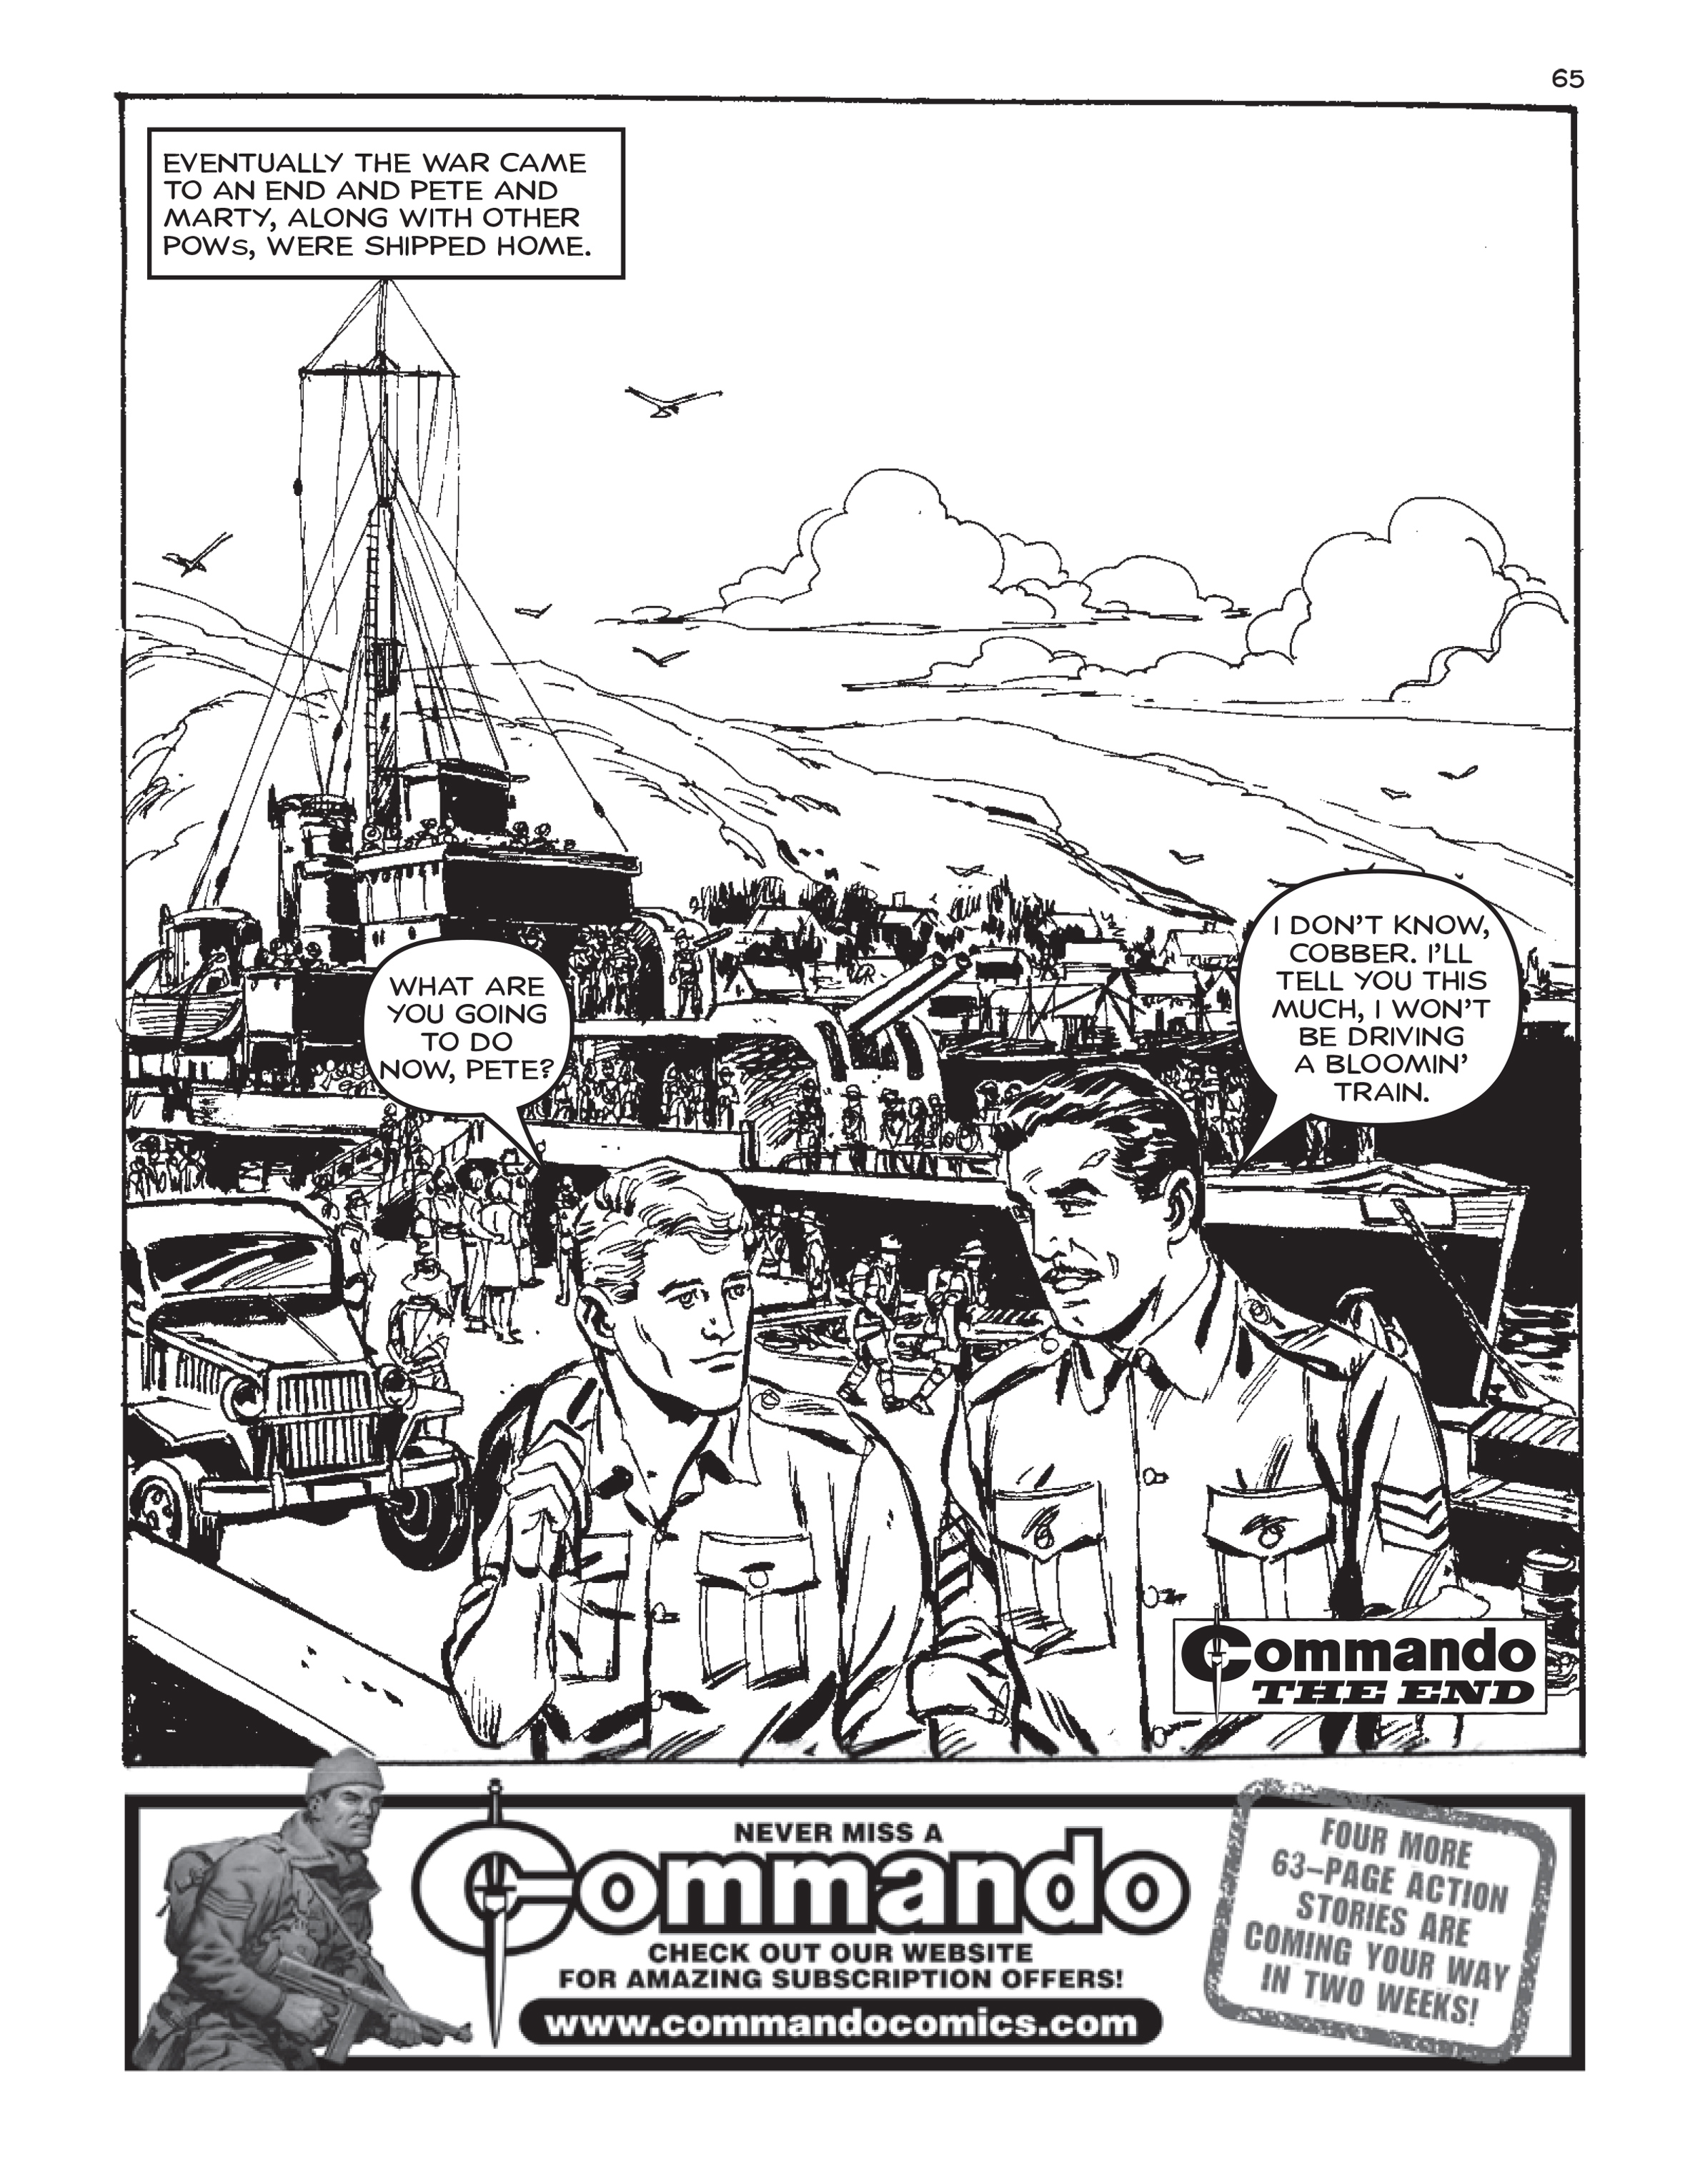 Read online Commando: For Action and Adventure comic -  Issue #5221 - 64